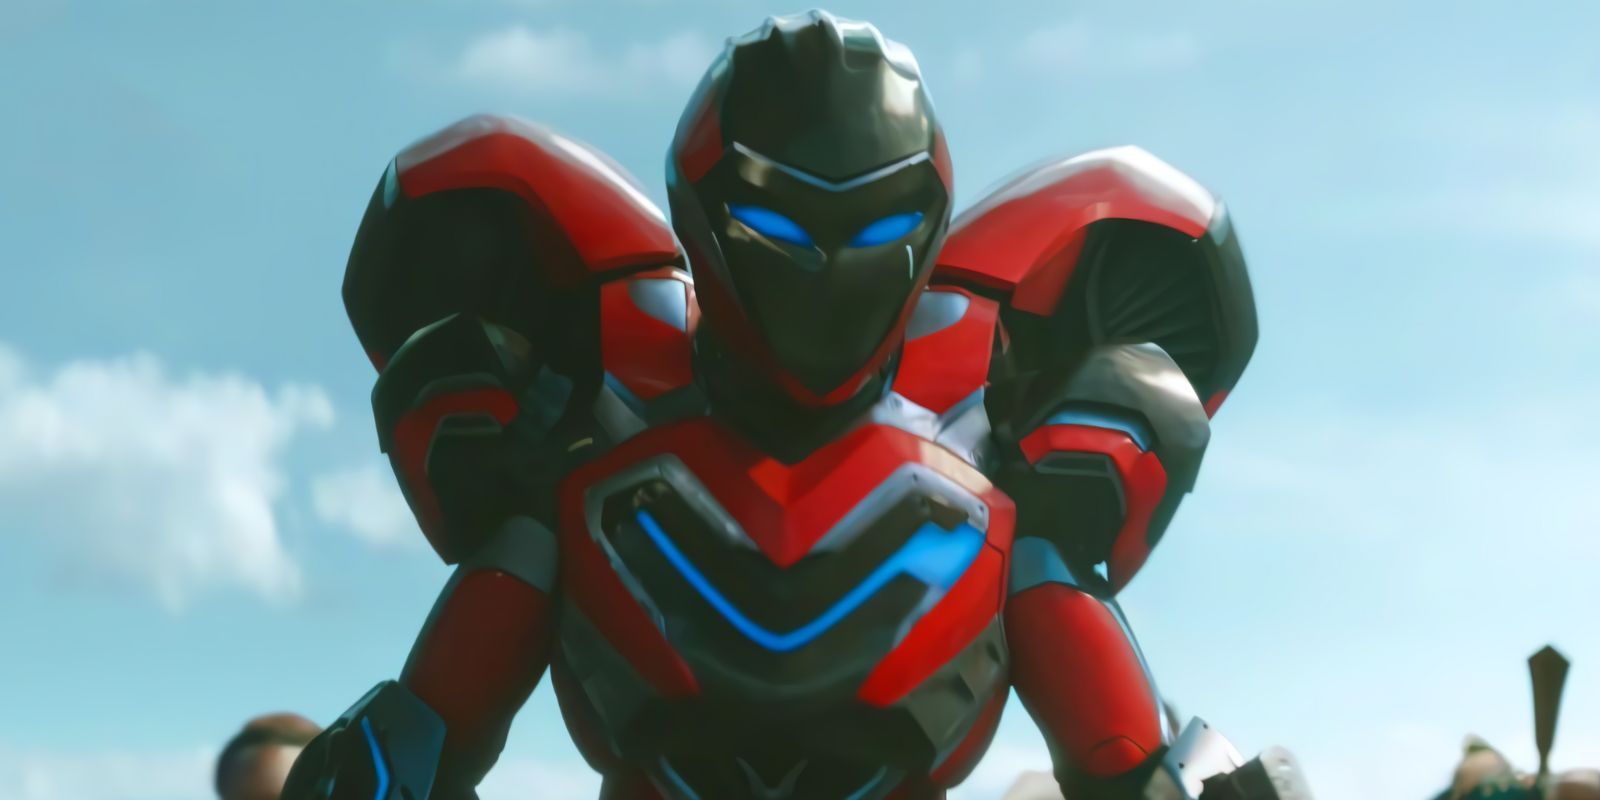 The MCU's Ironheart Mk. 2 (Dominique Thorne) backed by a blue sky